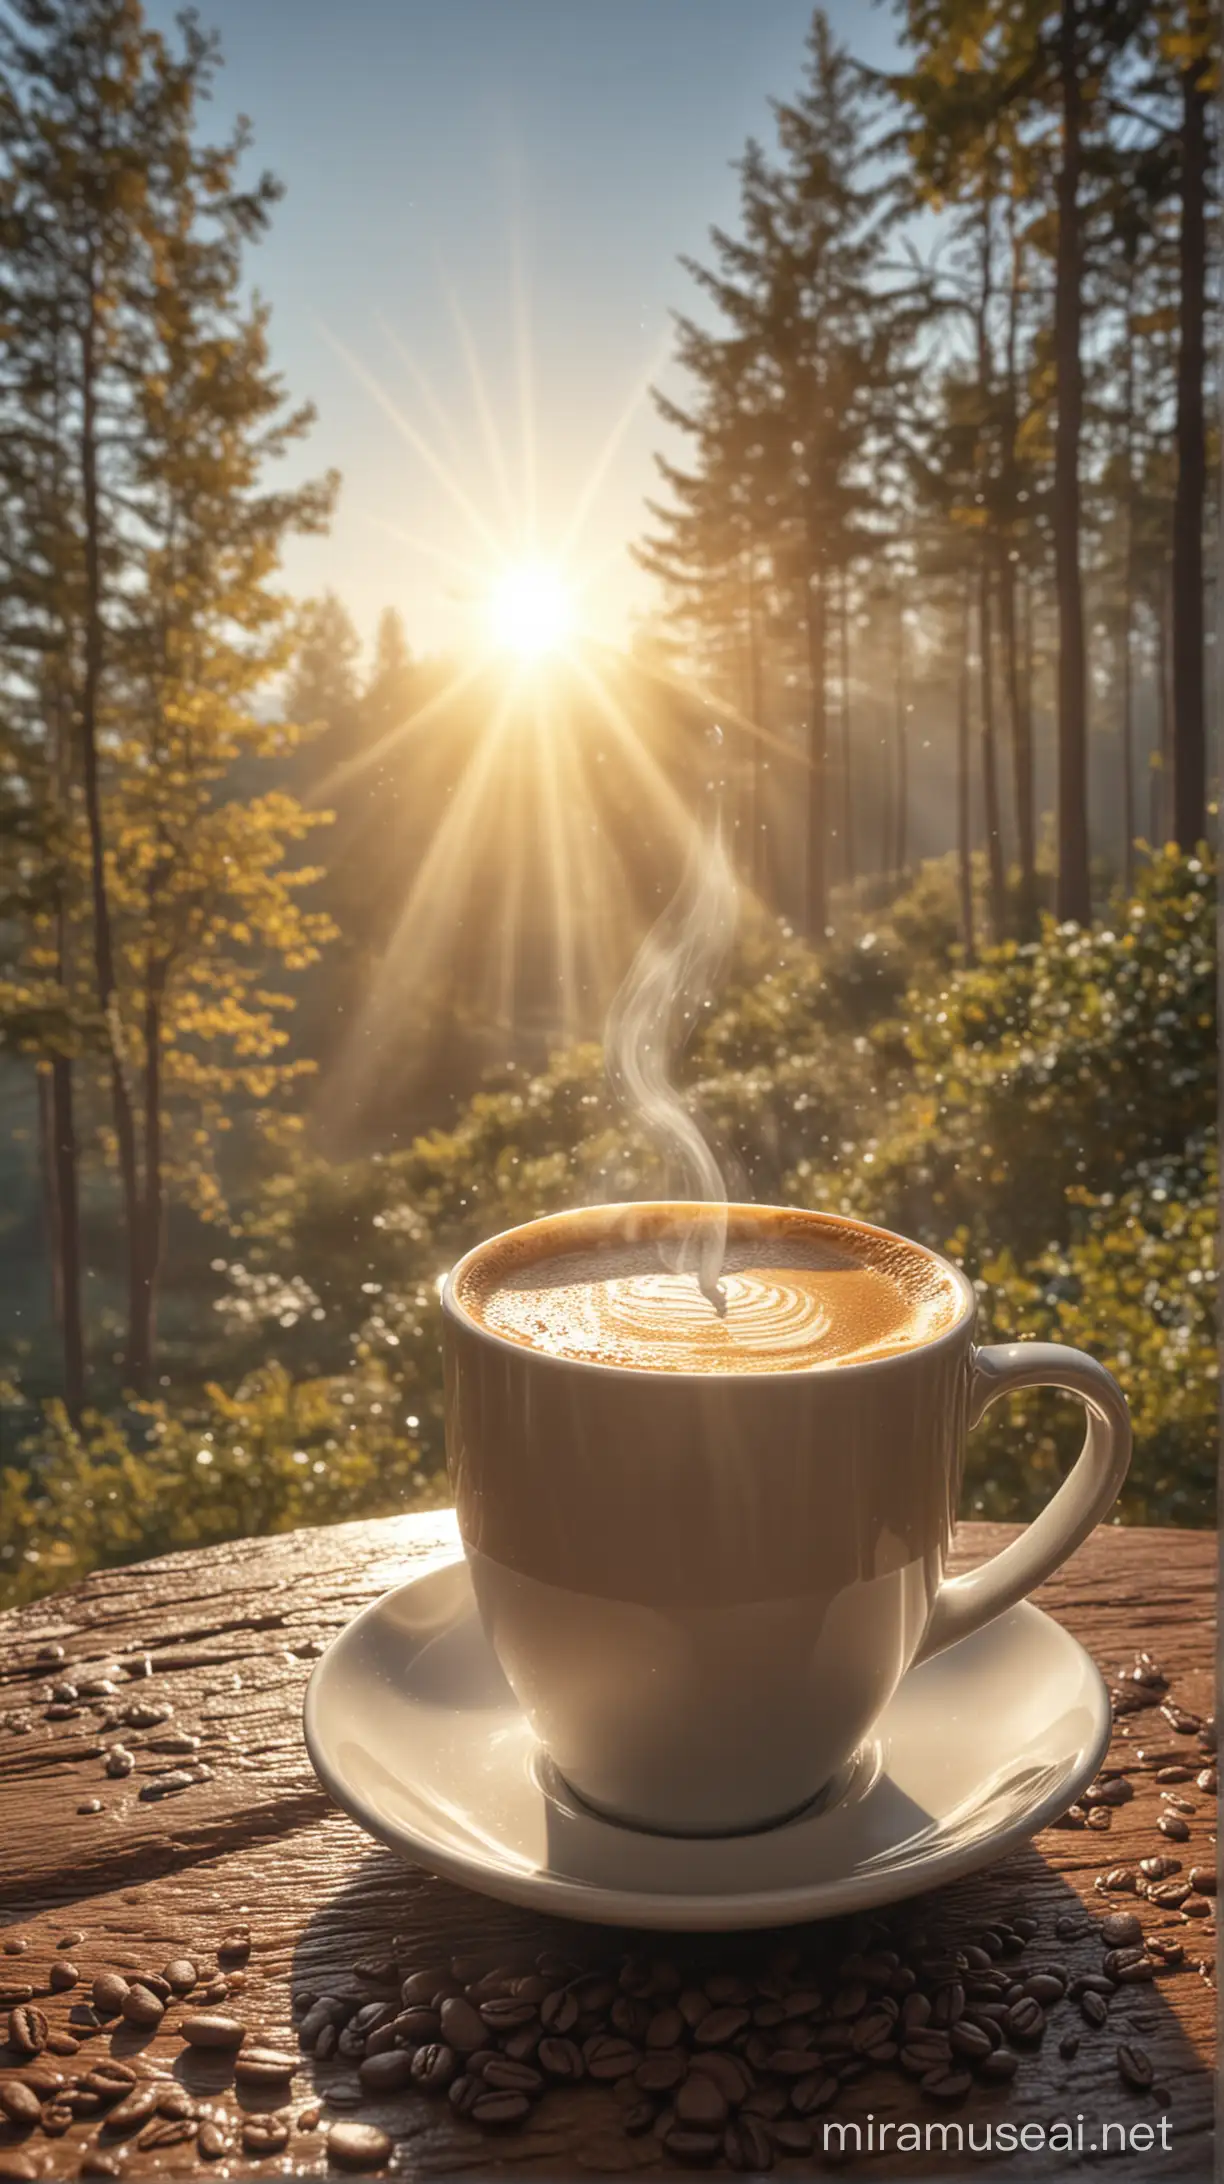 Morning Coffee Adventure with Sunlight in 4K HDR